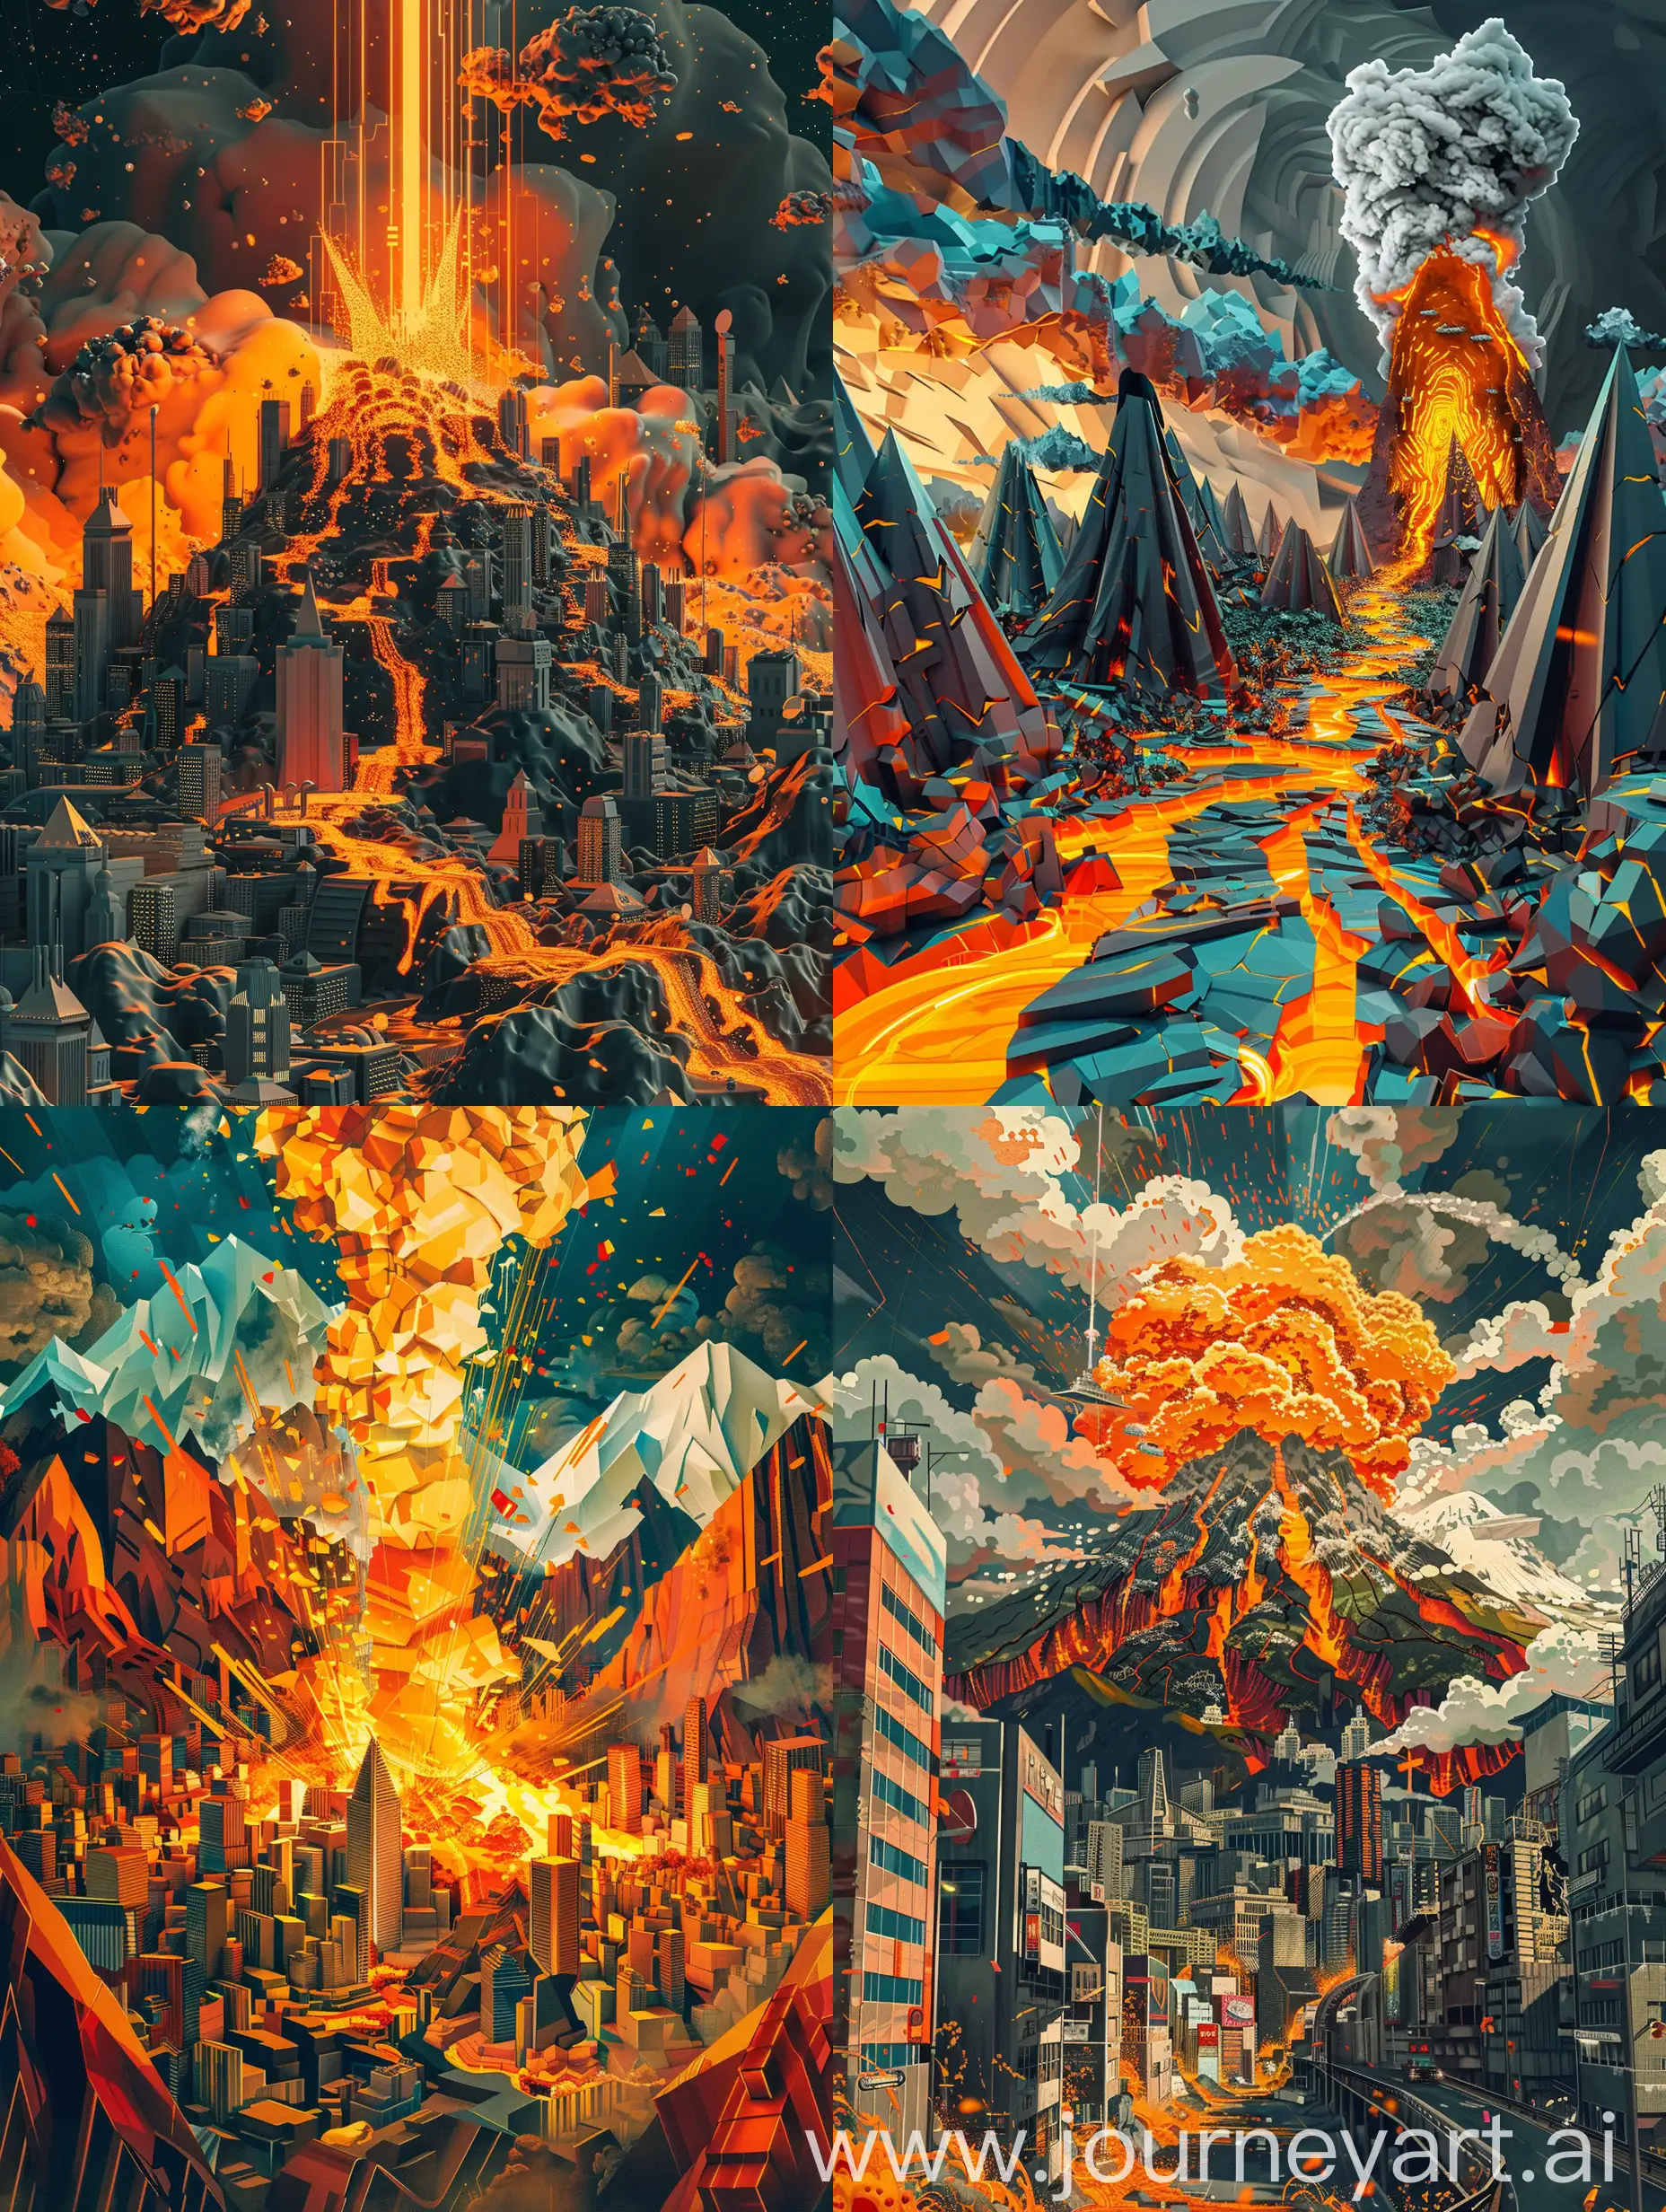 32k resolution, intricately detailed DeviantArt illustration of a surreal, fantastical volcano with smoldering, orange-gold metallic lava that is spewing out and creeping through the city destroying everything in its path. Neo-Cubism, layered overlapping geometry, art deco painting, geometric fauvism, layered geometric vector art, maximalism; V-Ray, Unreal Engine 5, angular oil painting